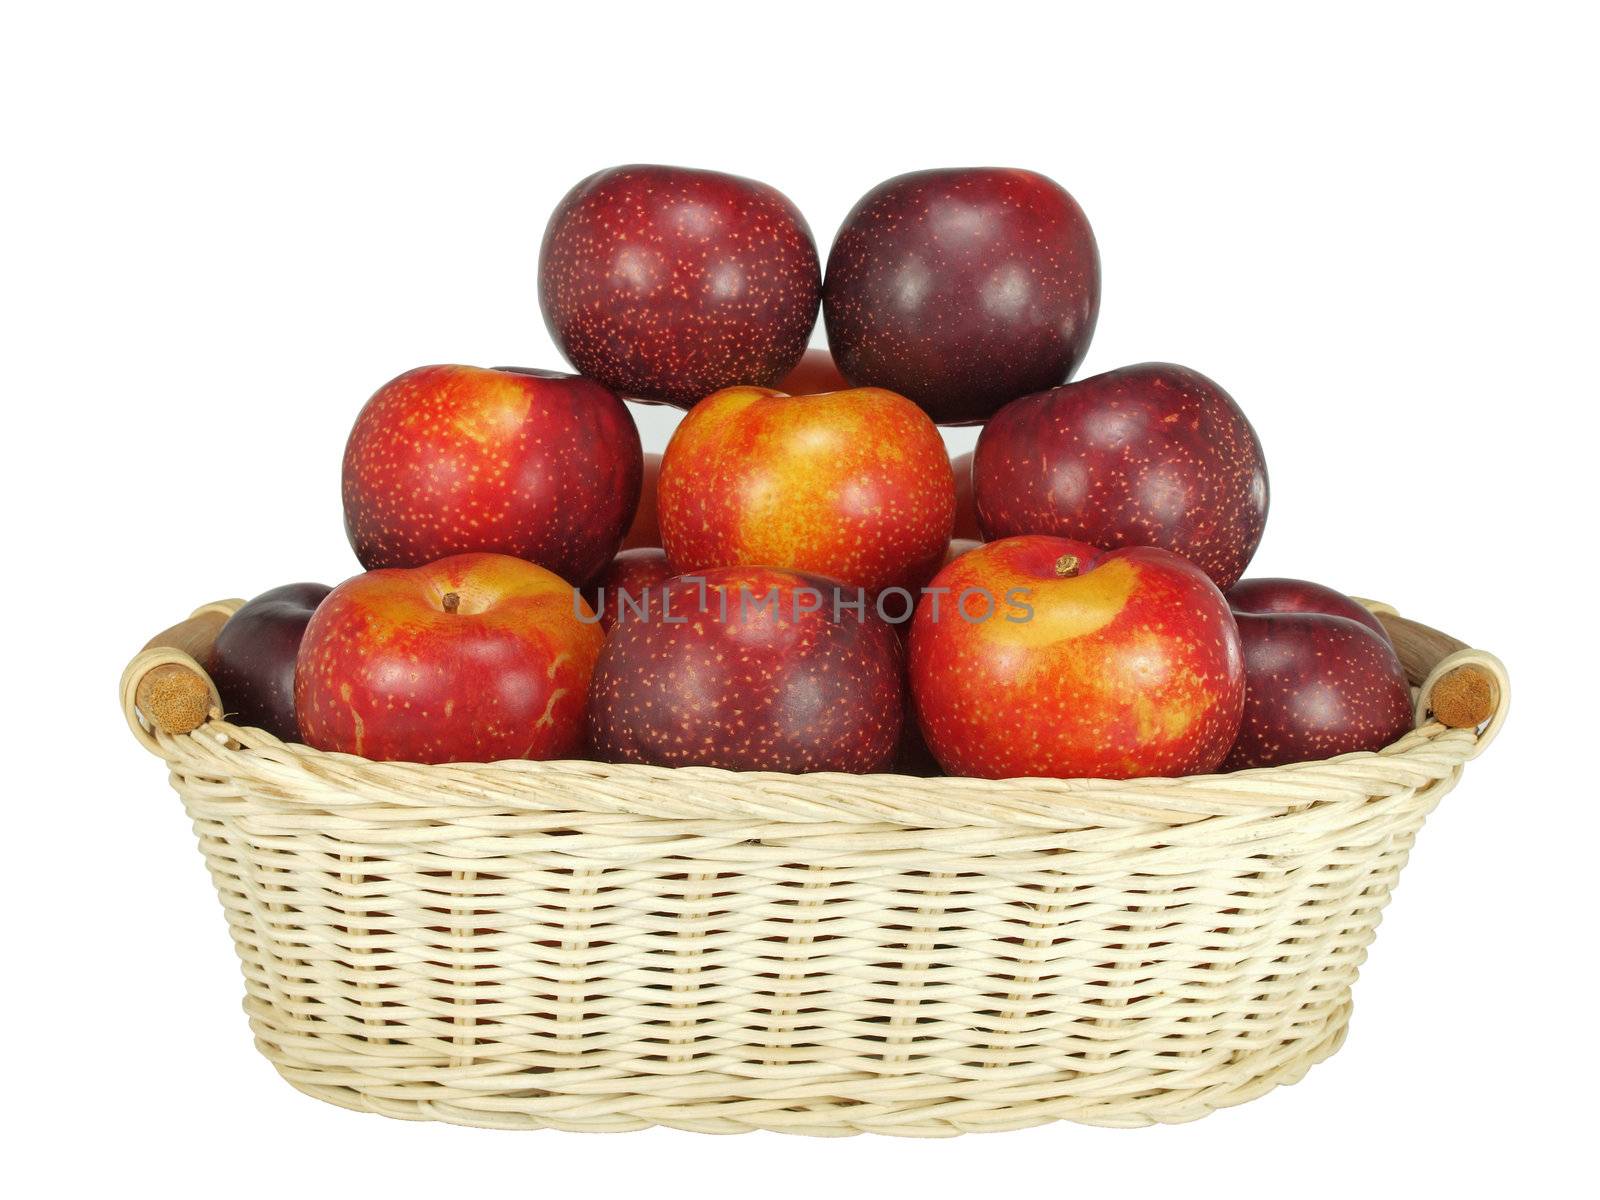 basket of plums by Ric510